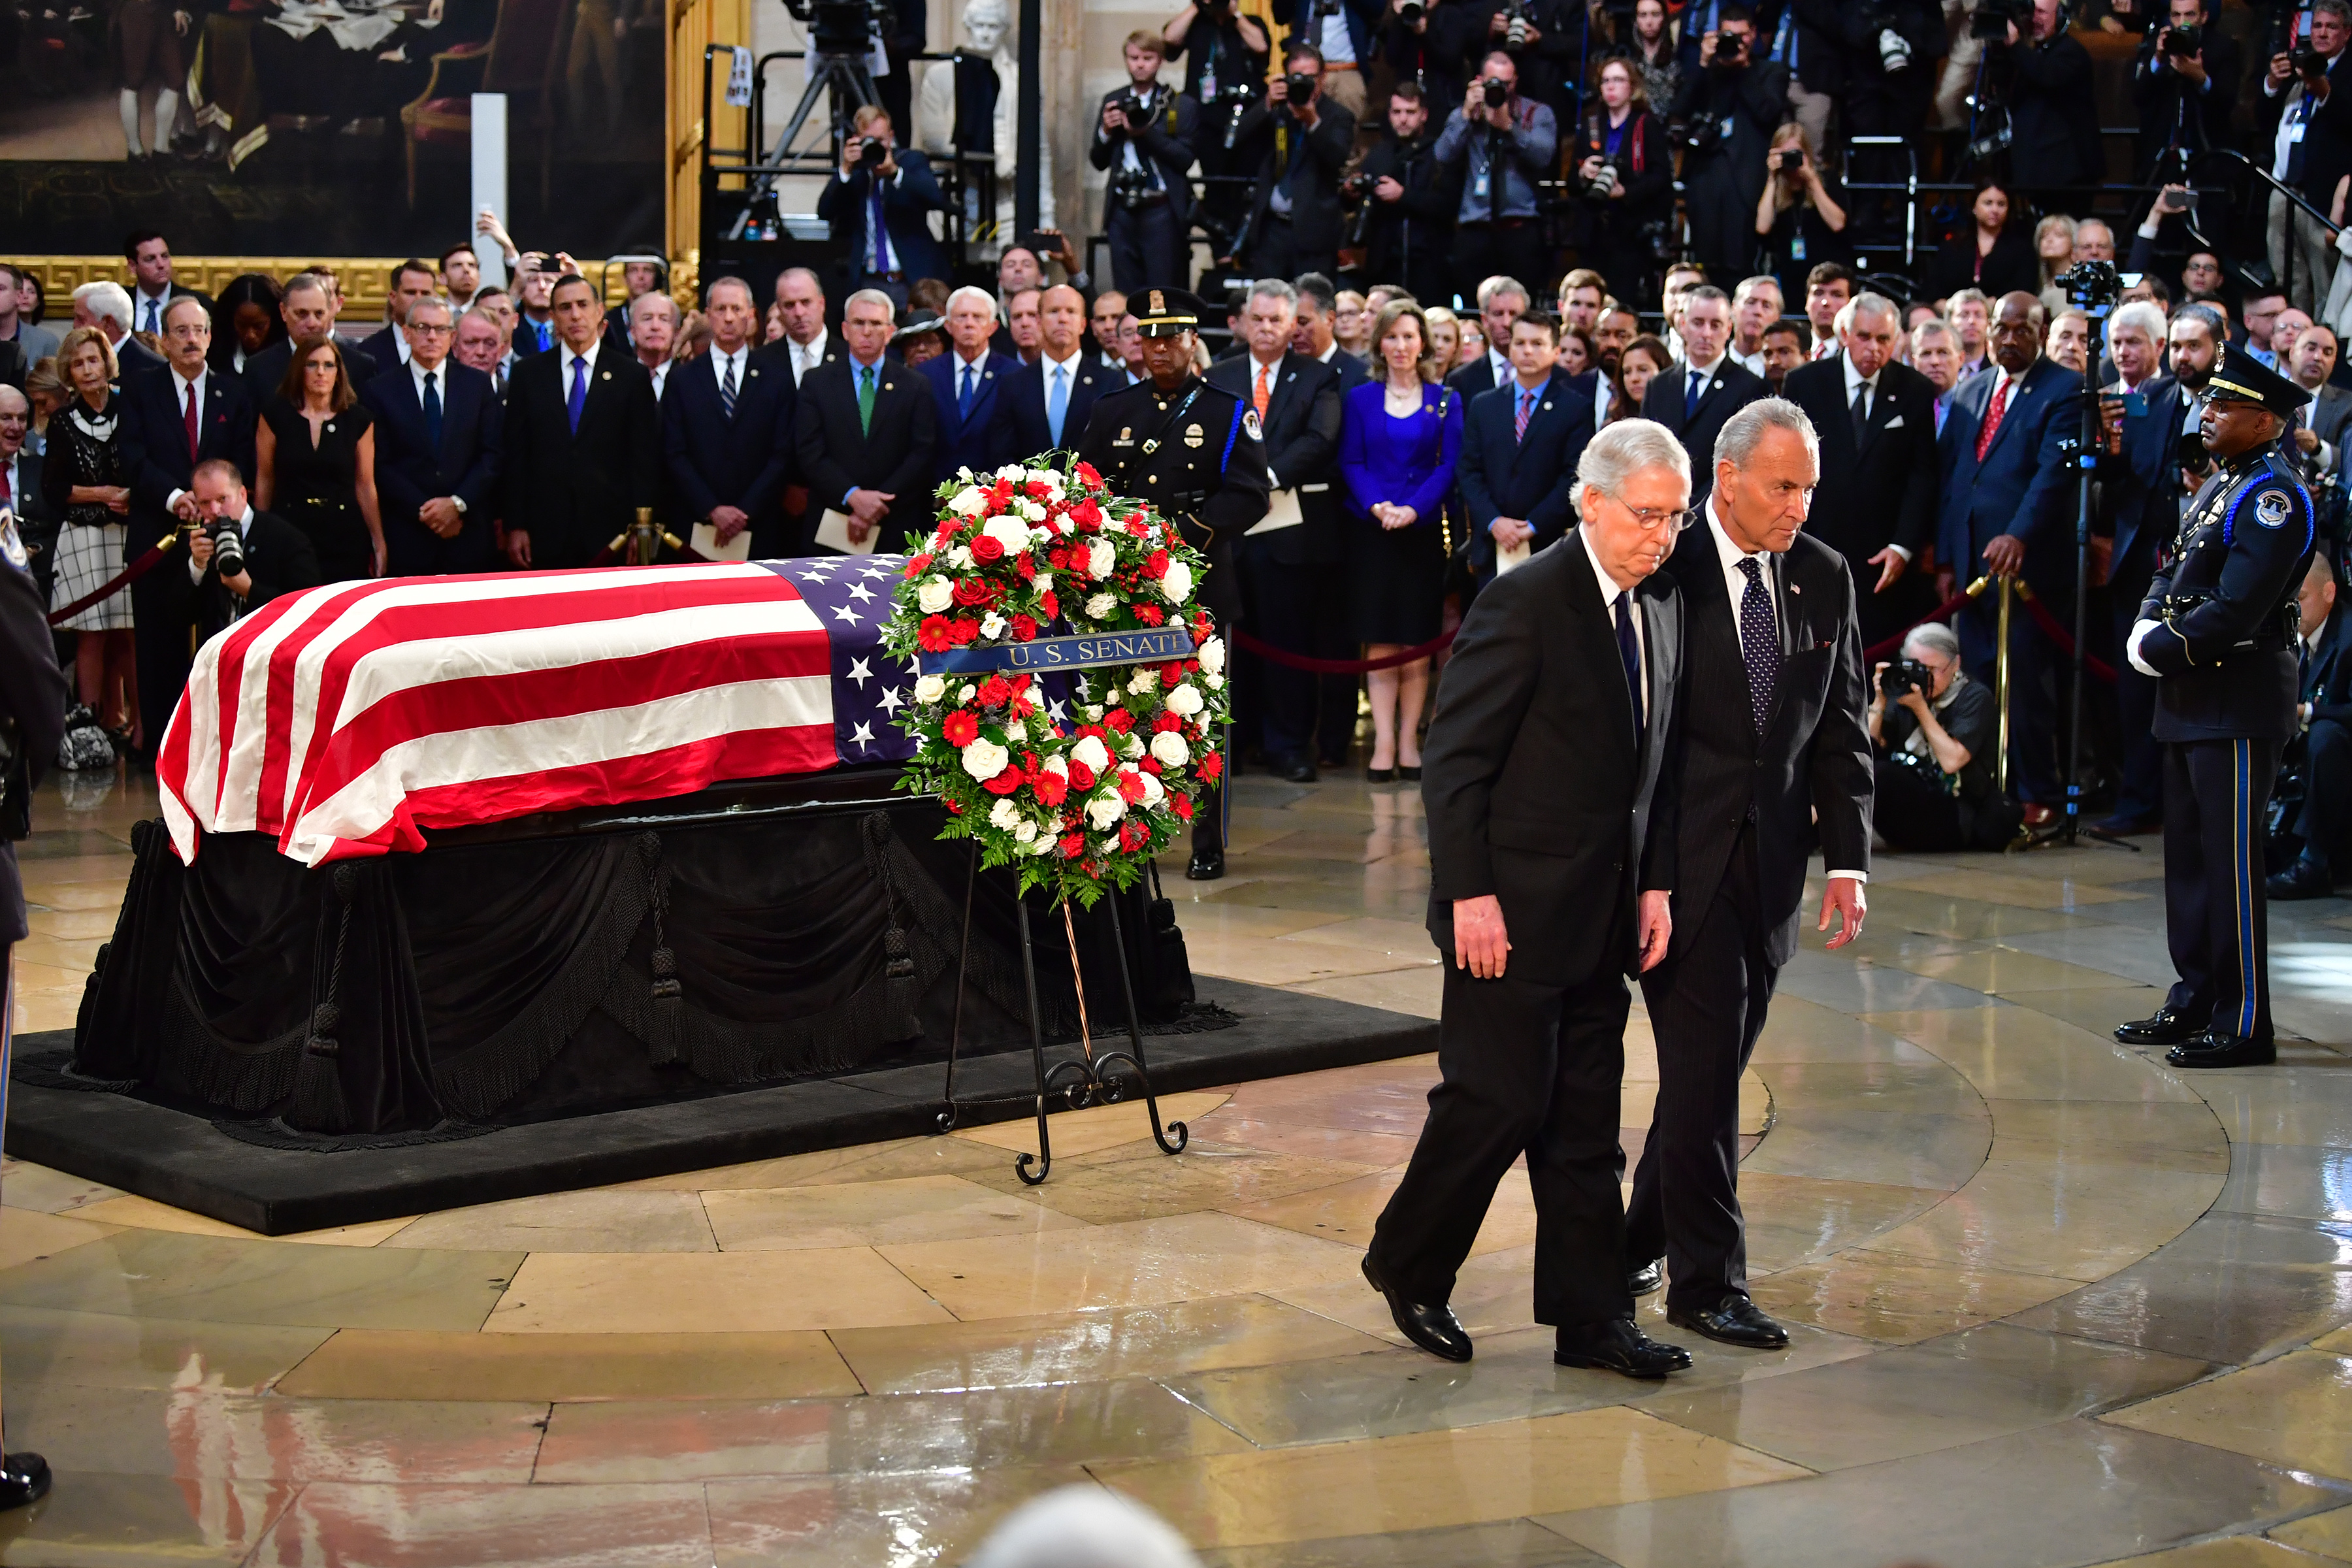 Senators Chuck Schumer and Mitch McConnell walk after viewing the casket of former Senator John McCain in the Capitol Rotunda where he will lie in state (Kevin Dietsch - Pool/Getty Images)